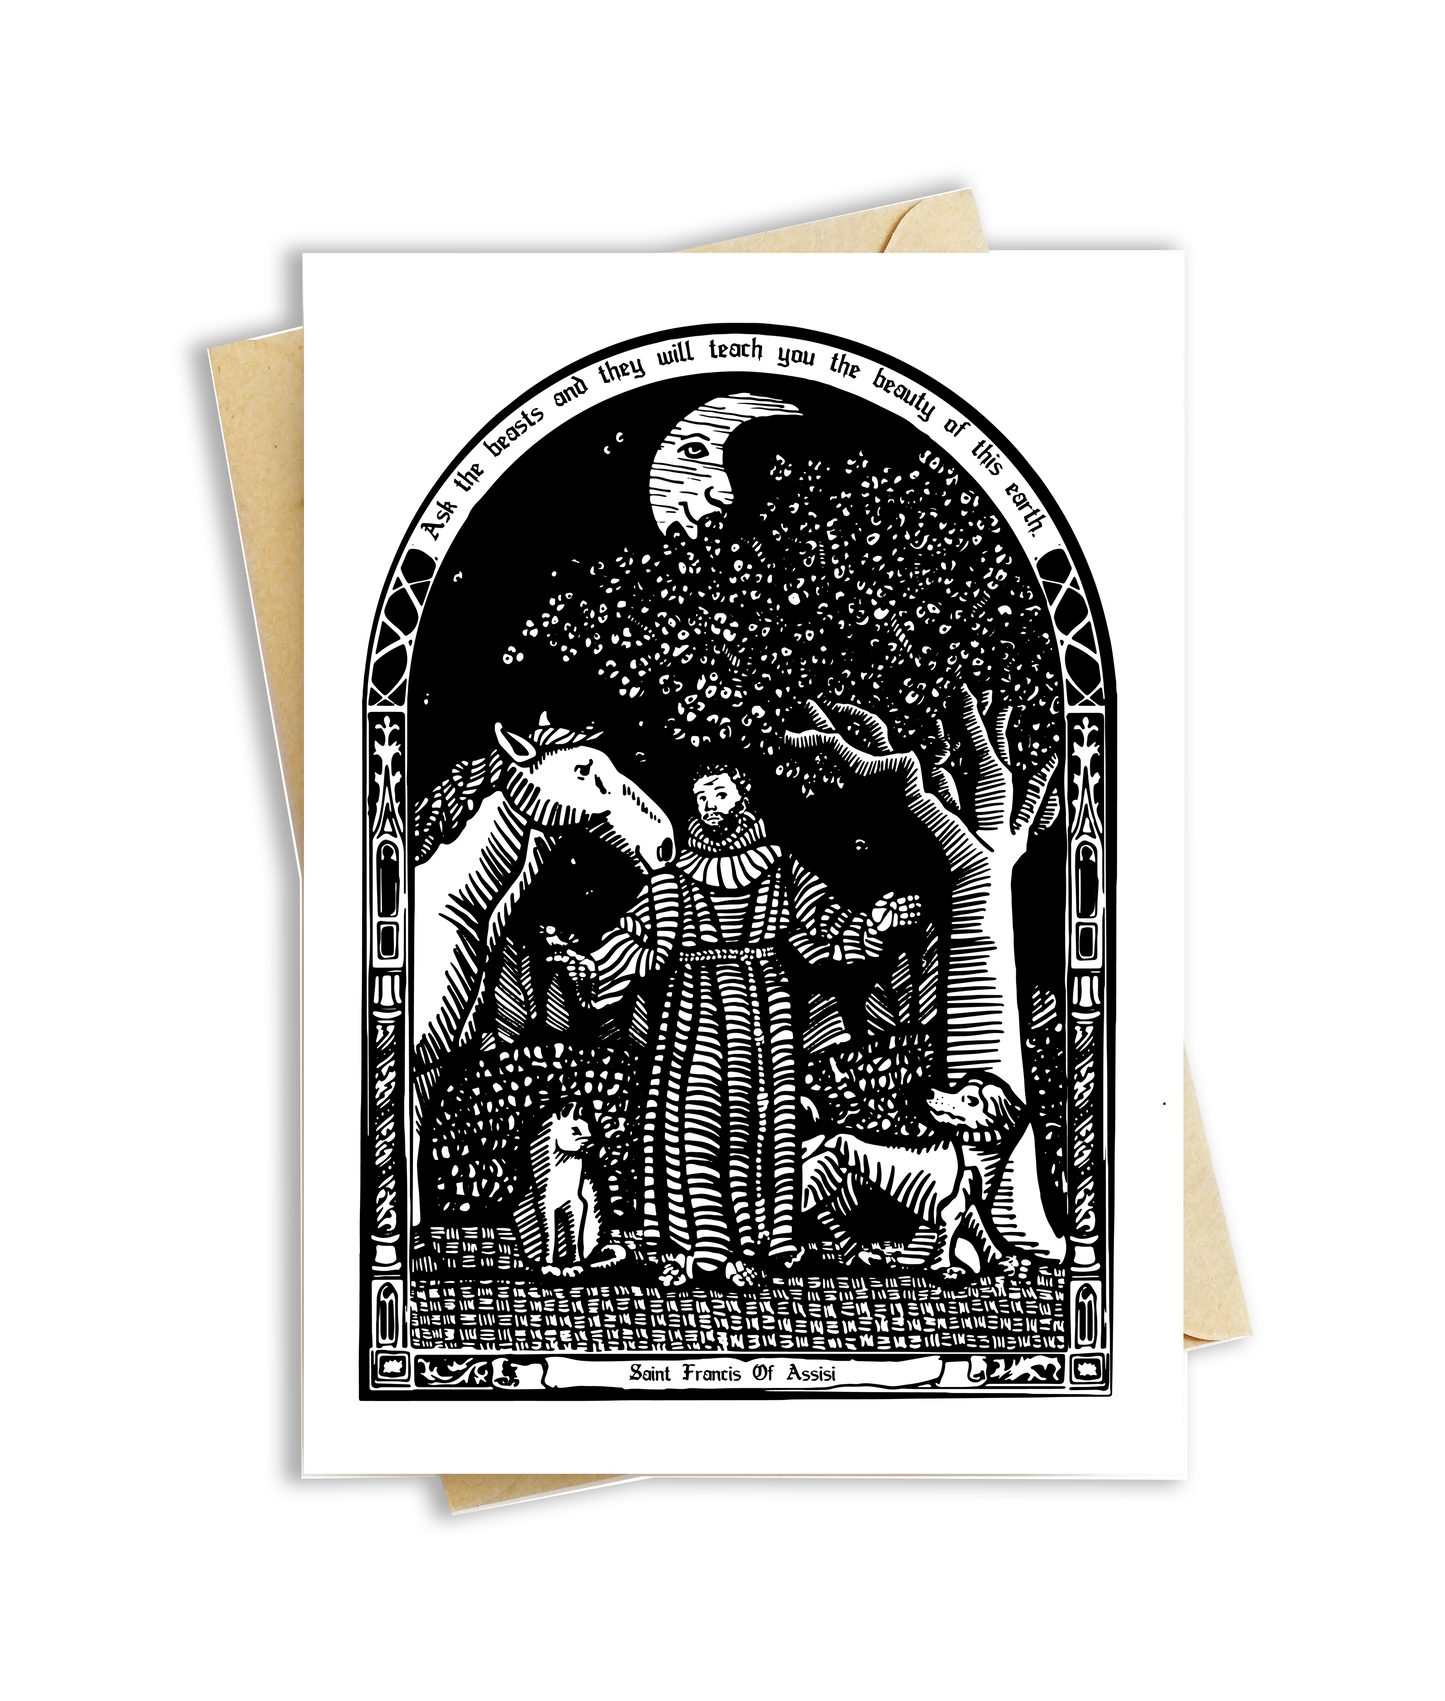 BellavanceInk: Greeting Card Of Saint Francis Of Assisi Patron Saint Of Animals 5 x 7 Inches